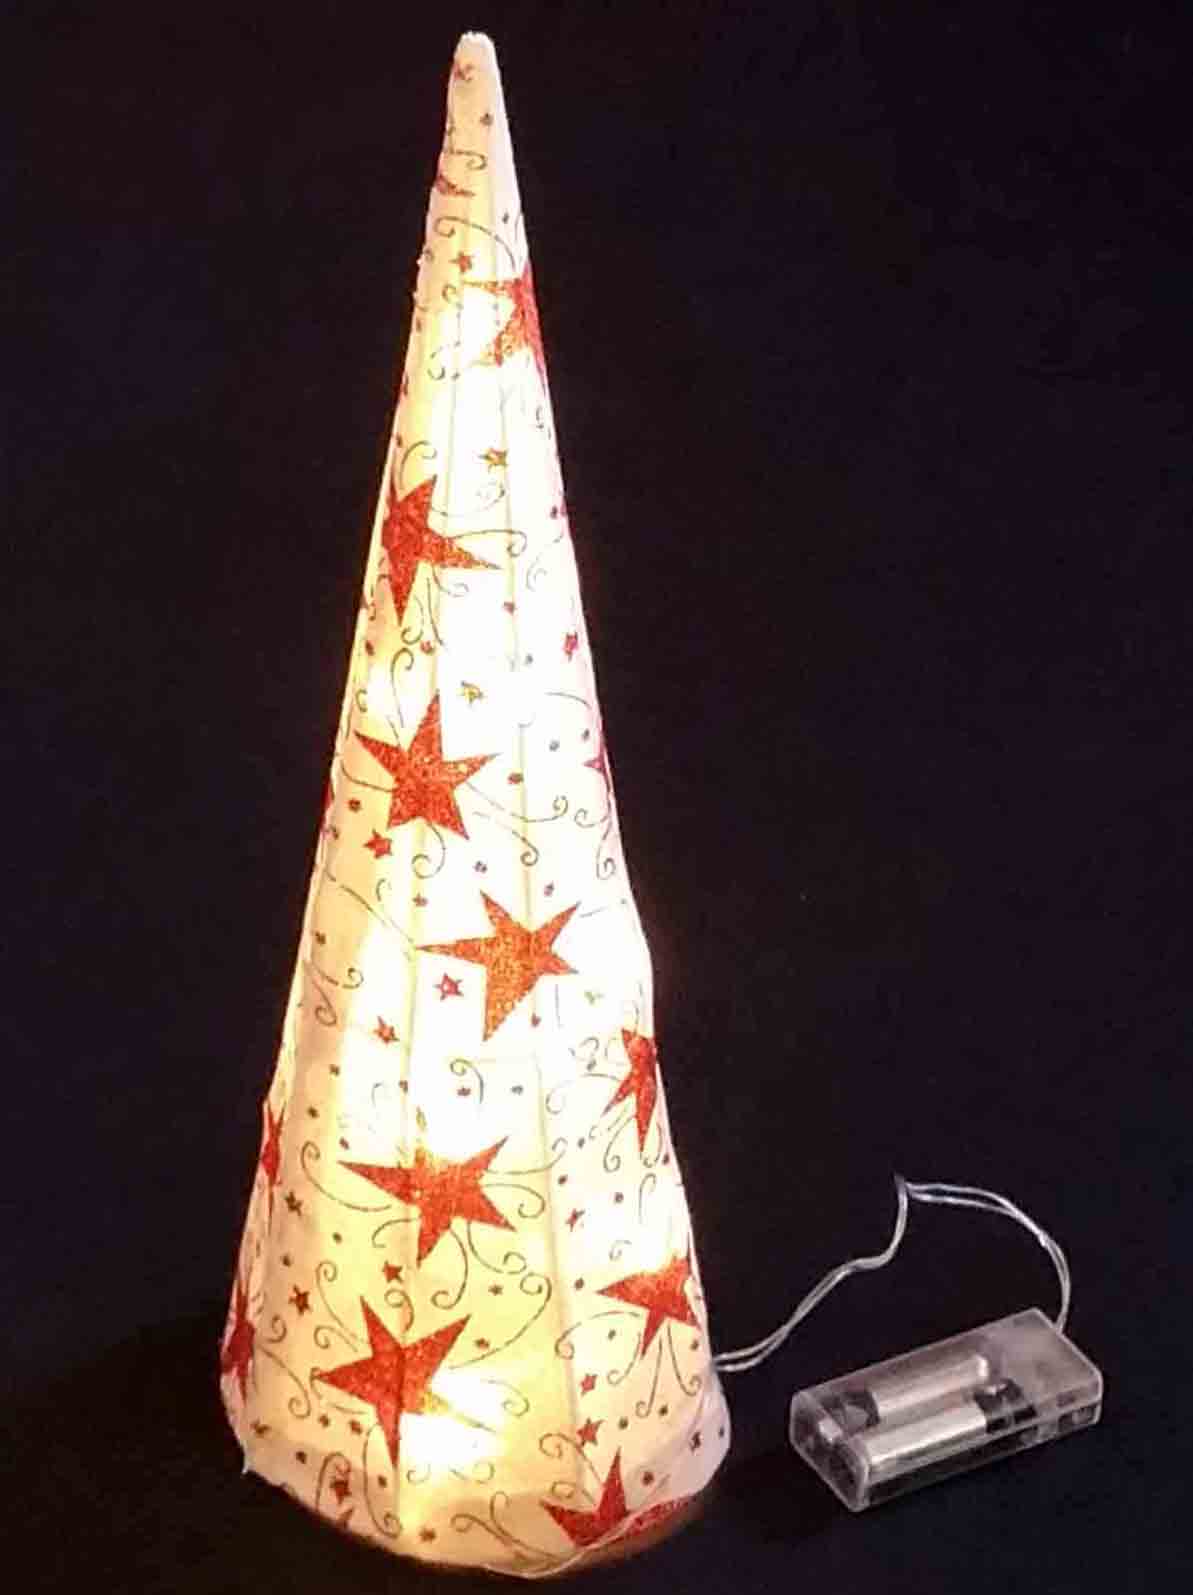 X848 - 15.5" Cone Tree with Lights - 6.95 ea, 6.75/6